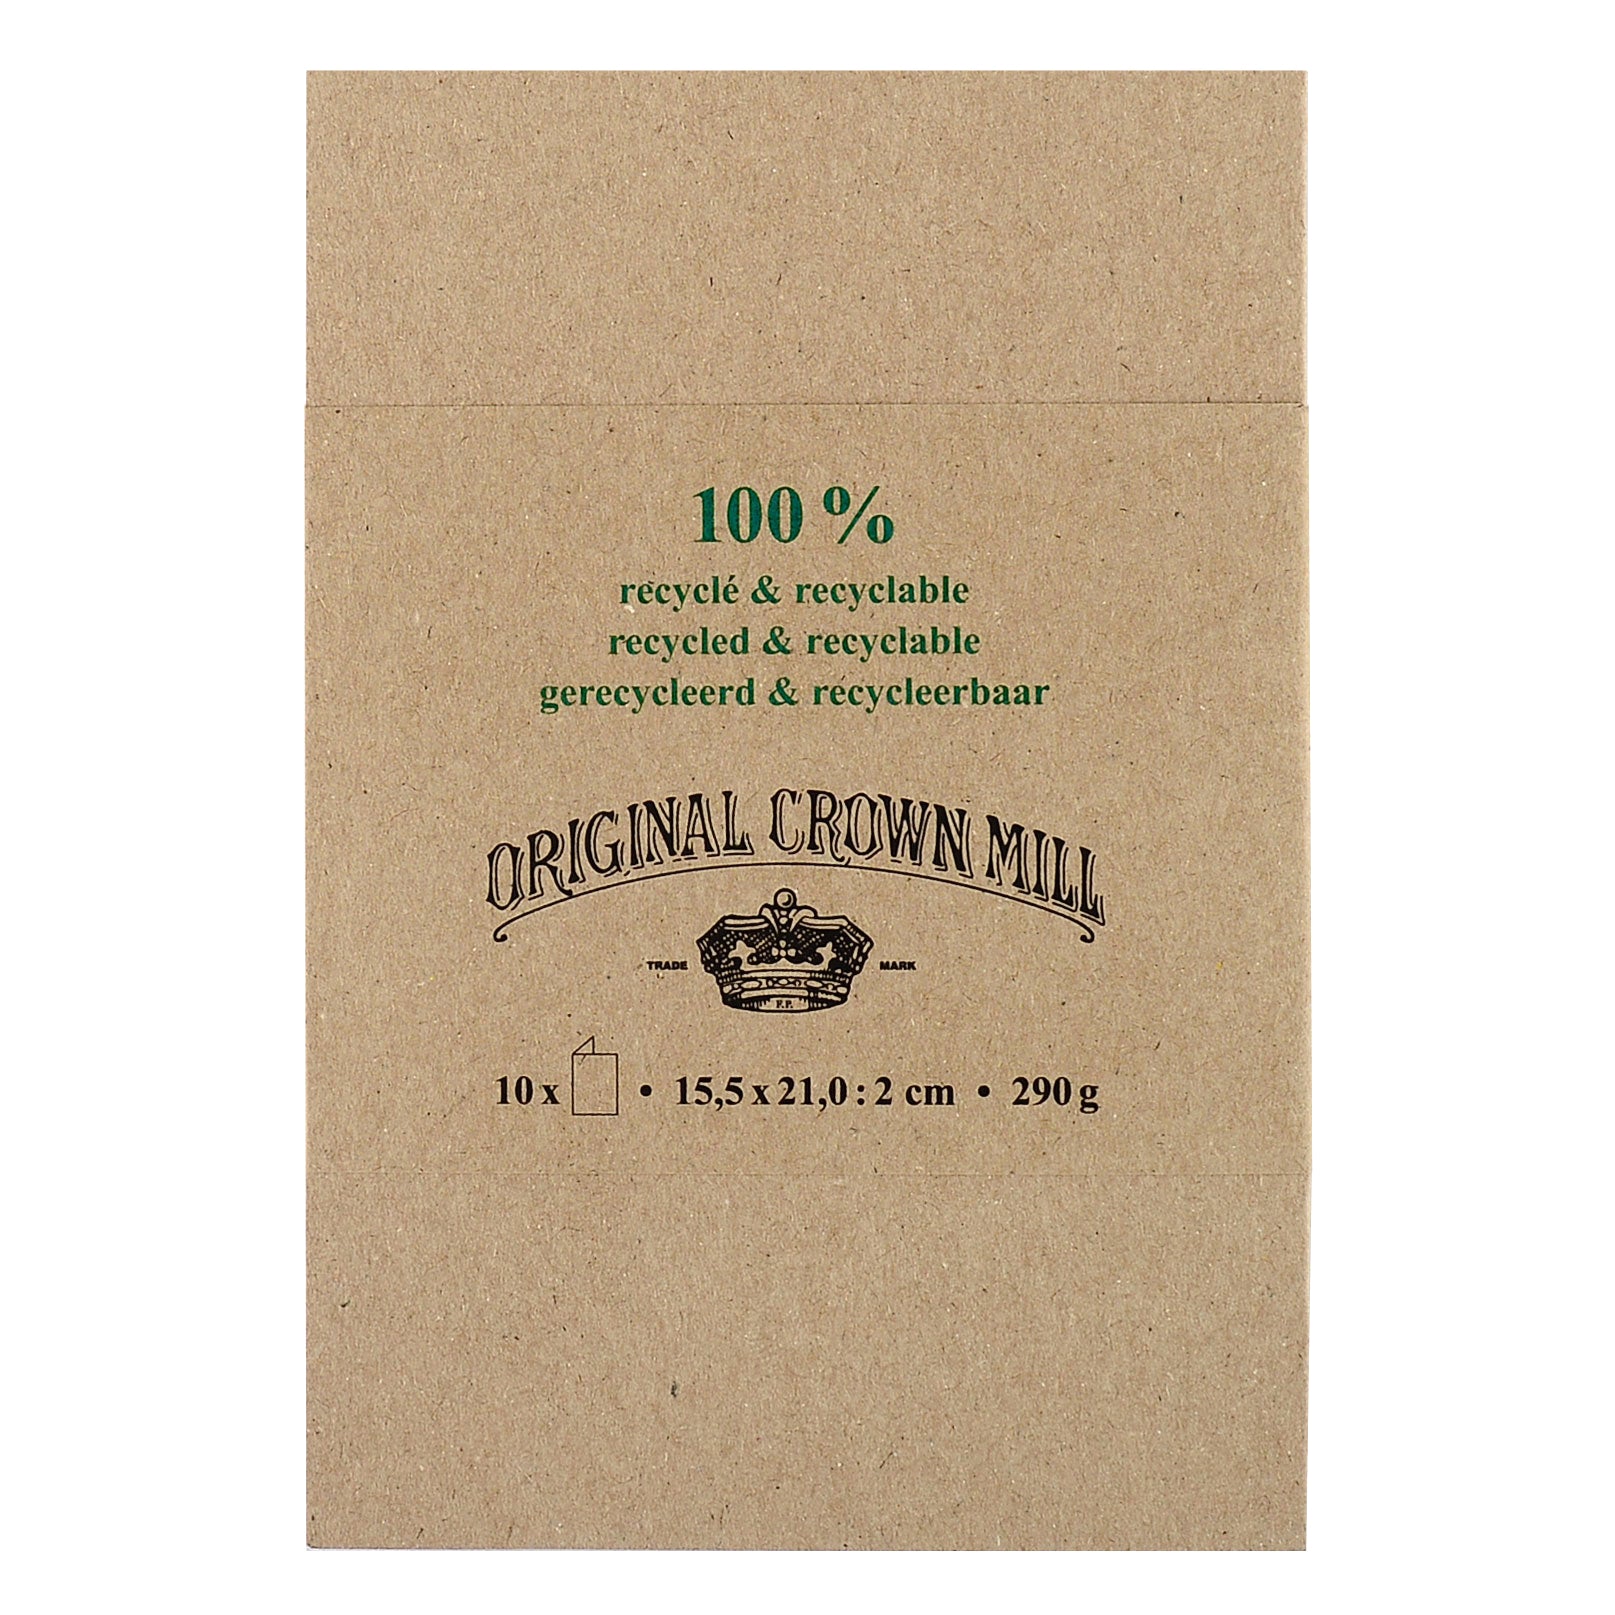 Crown Mill Crown Mill 100% Recycled Stationery | Folded Cards and Envelopes 